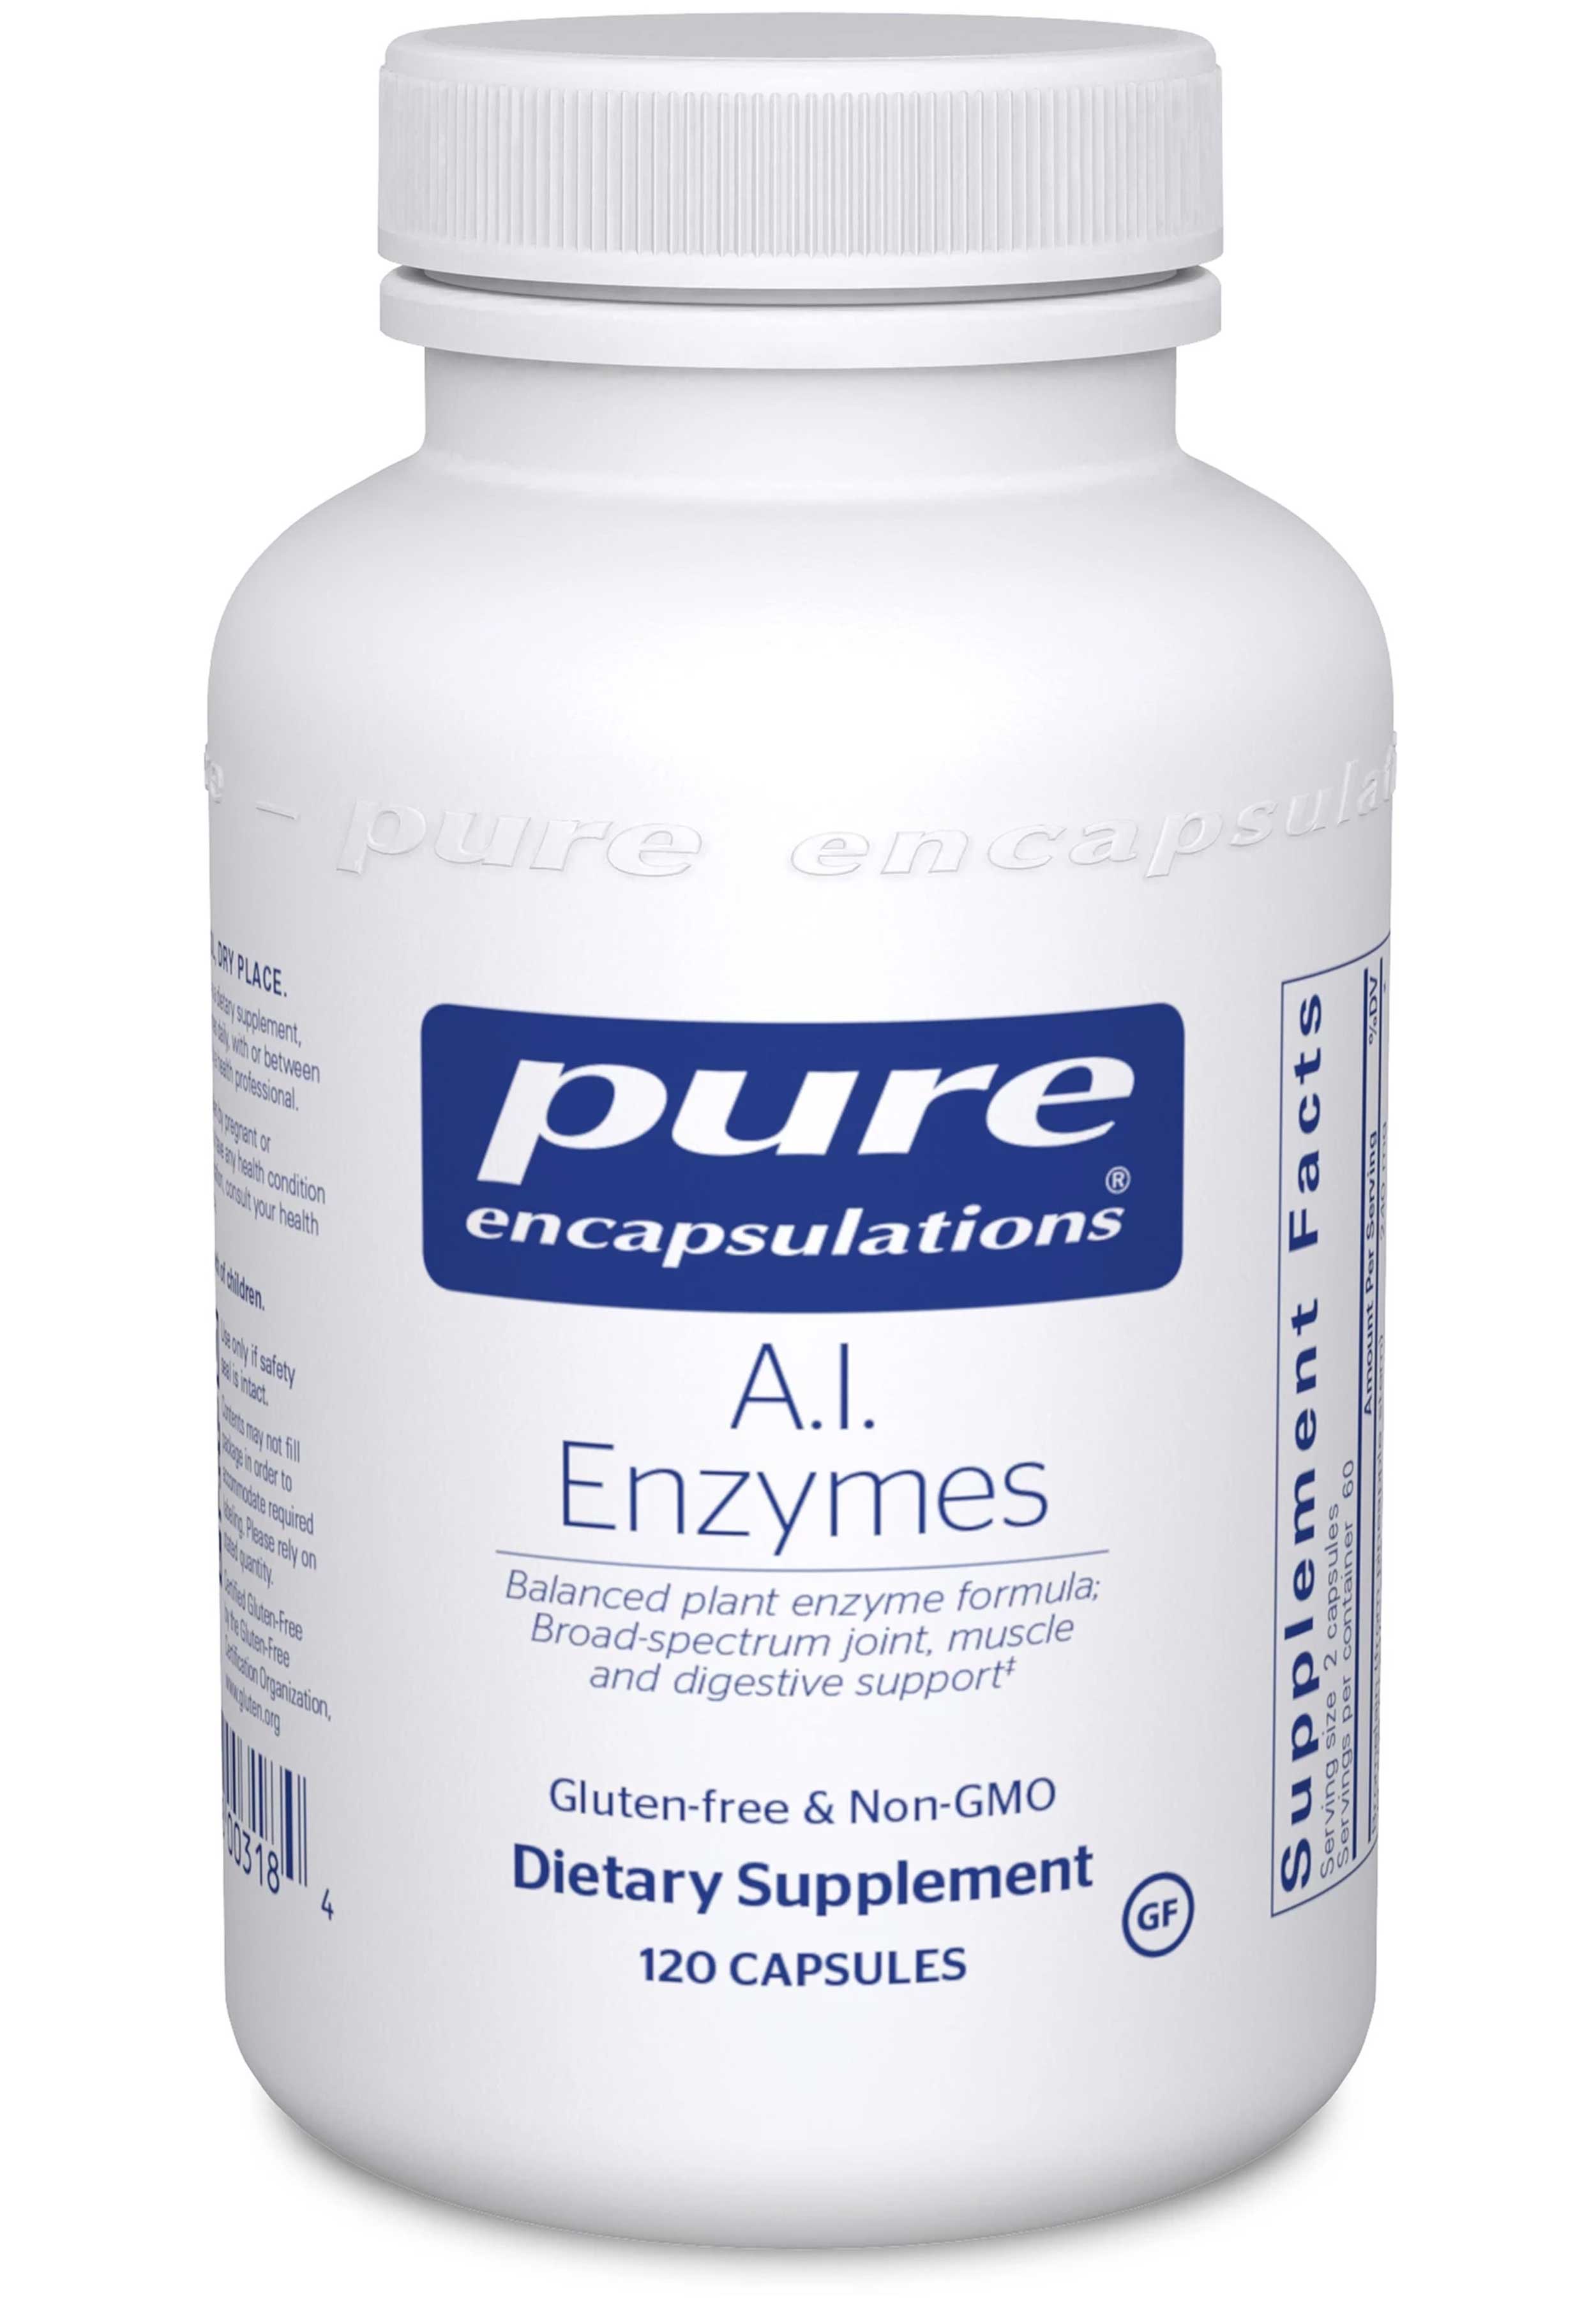 Pure Encapsulations A.I. Enzymes